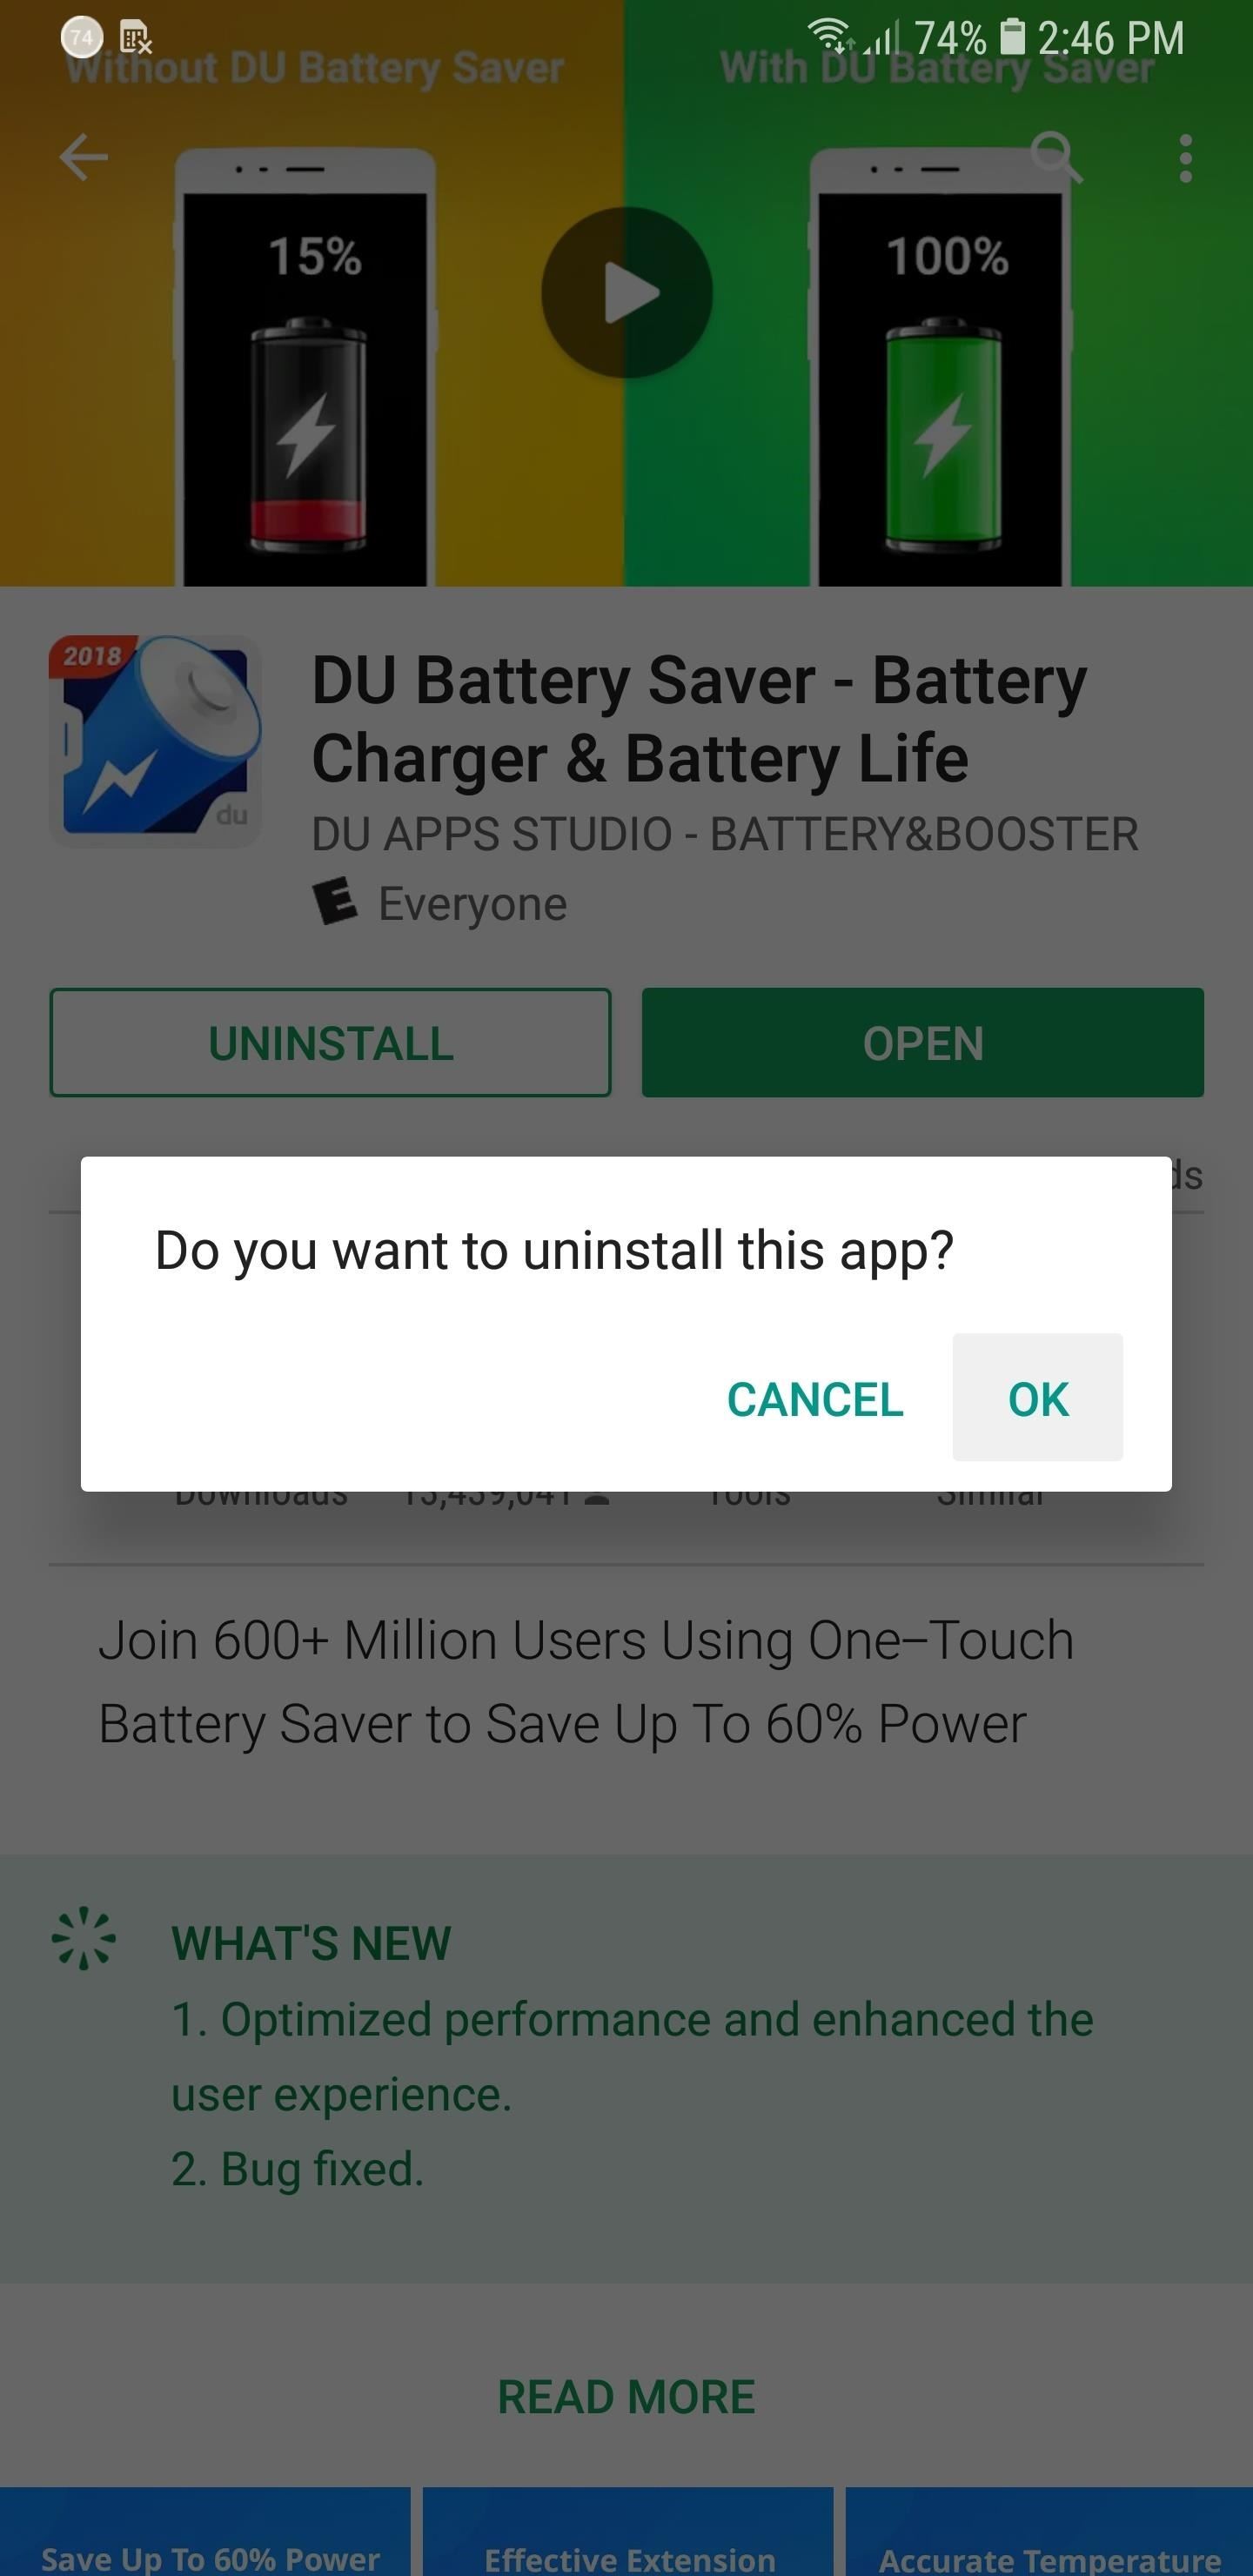 Ads Taking Over Your Lock Screen? Here's How to Fix It